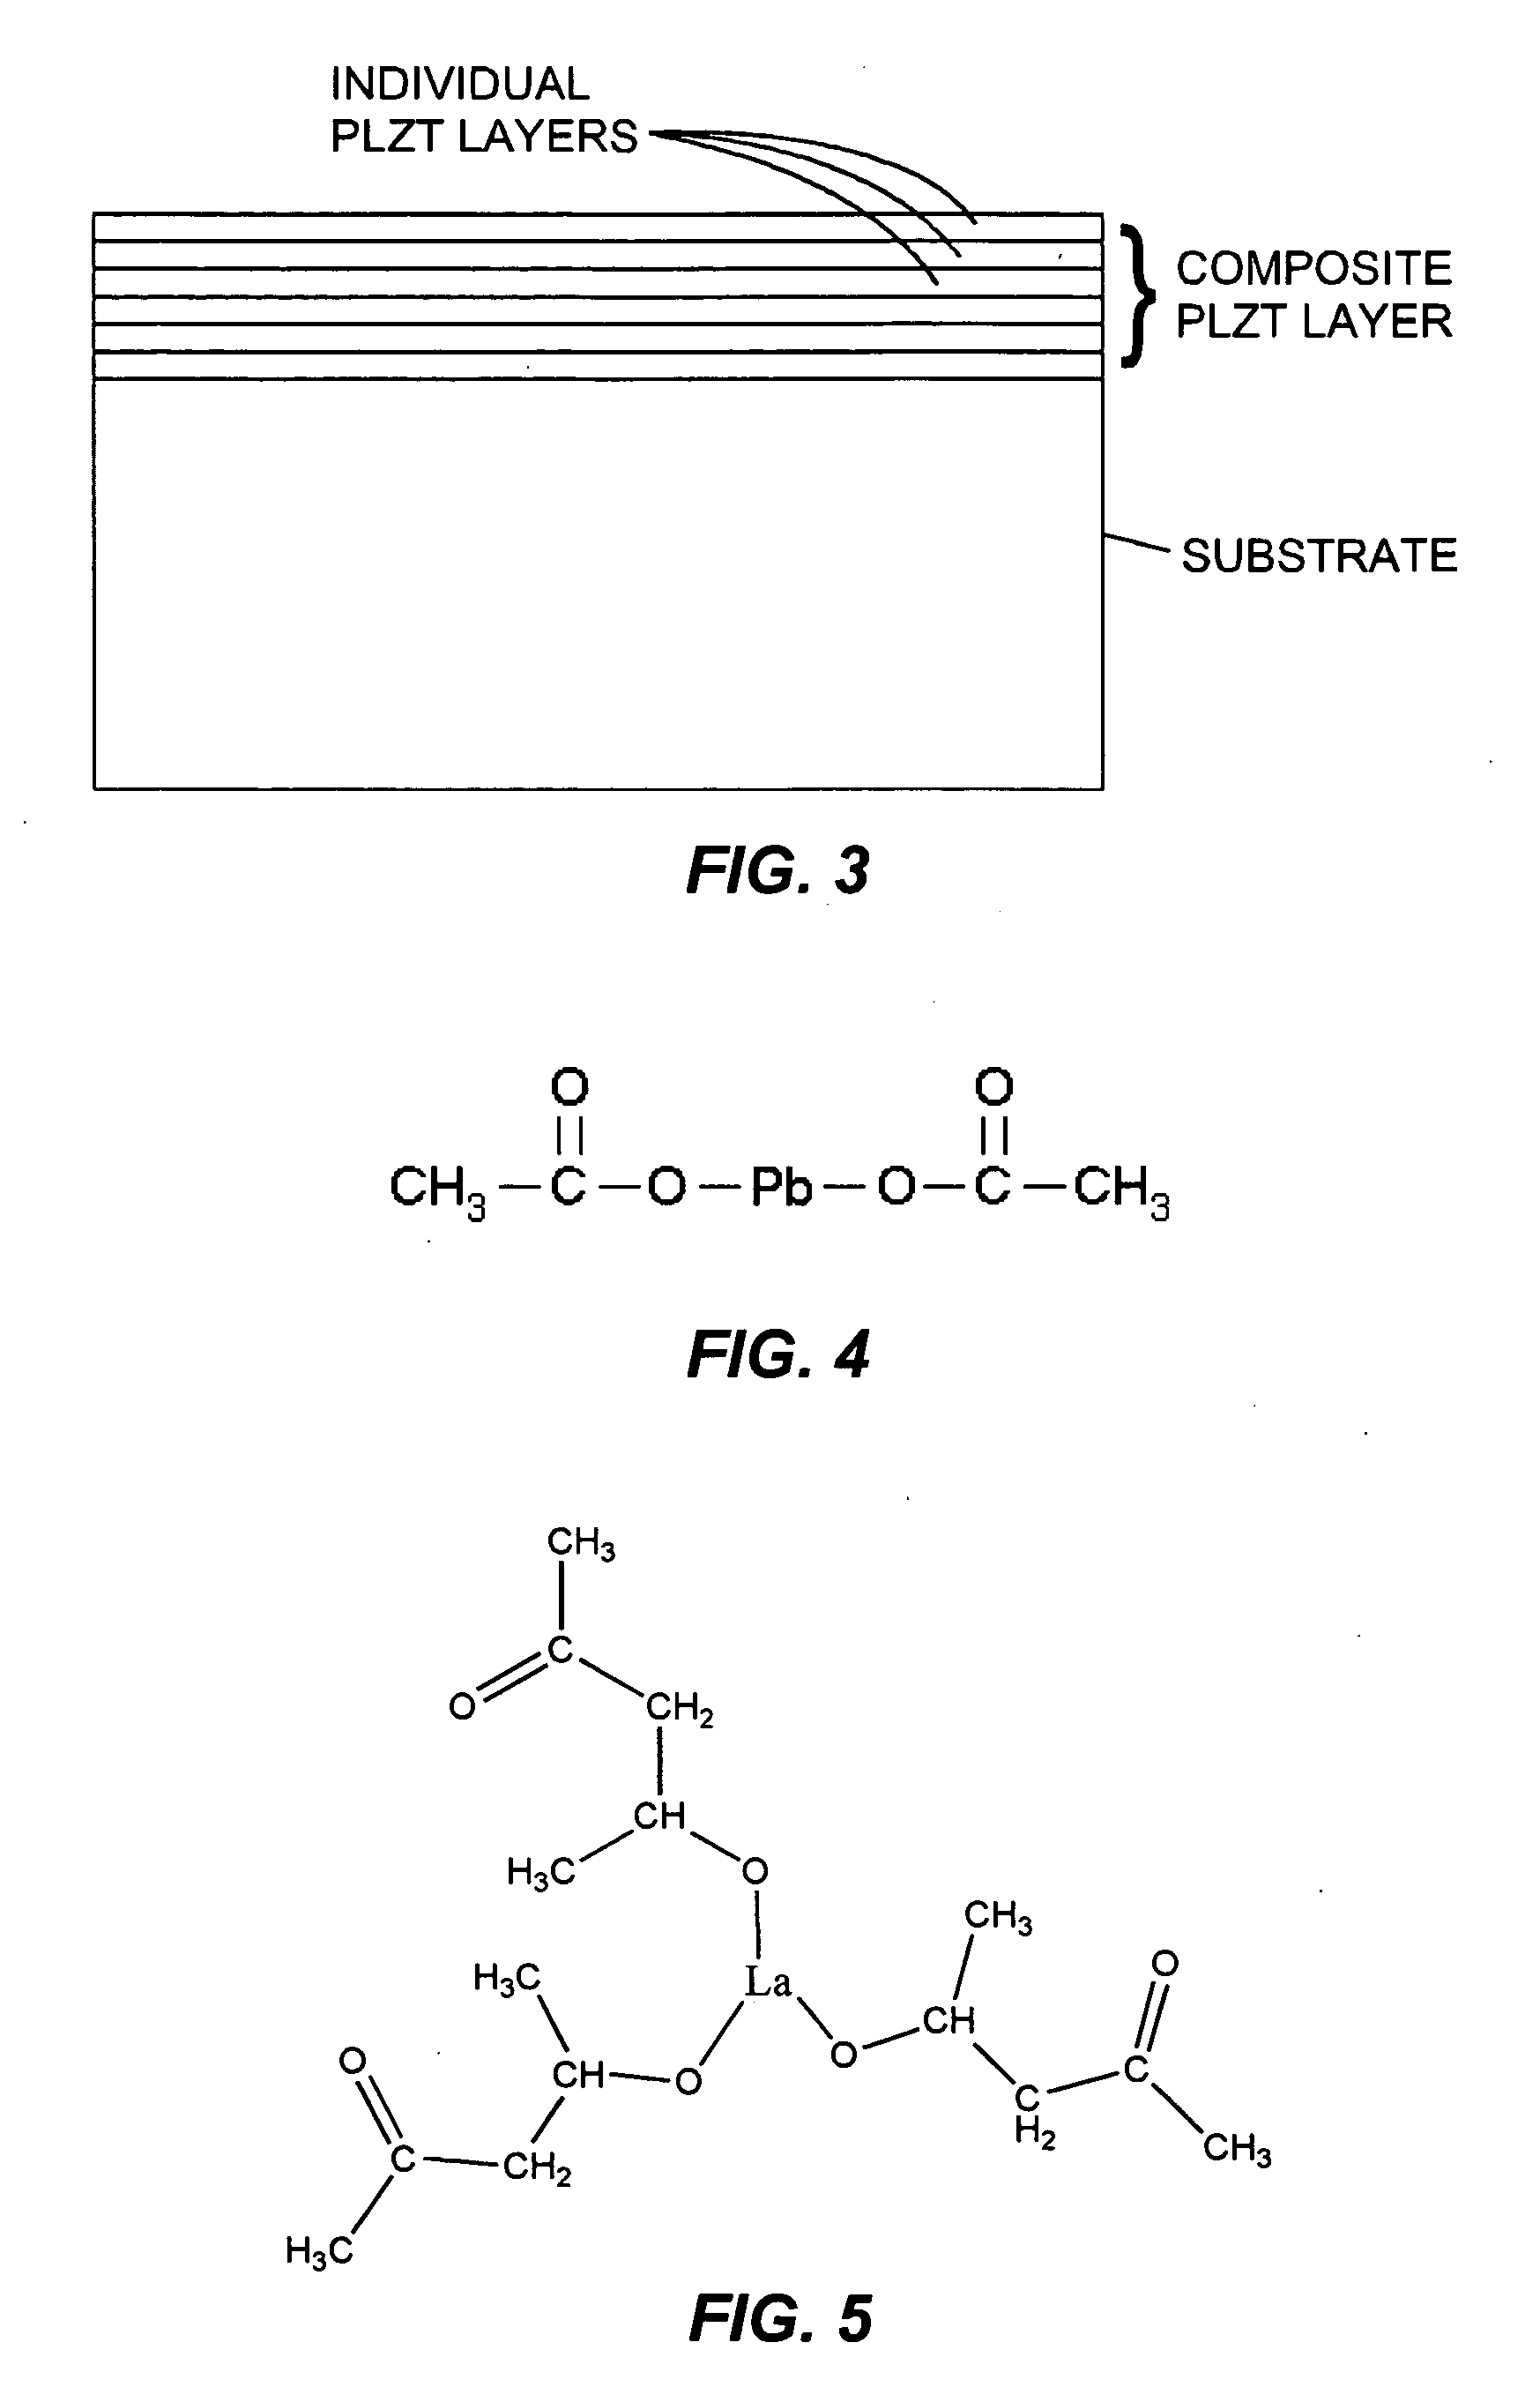 Methods of forming lanthanum-modified lead zirconium titanate (PLZT) layers, devices with PLZT layers, and precursor formation solutions